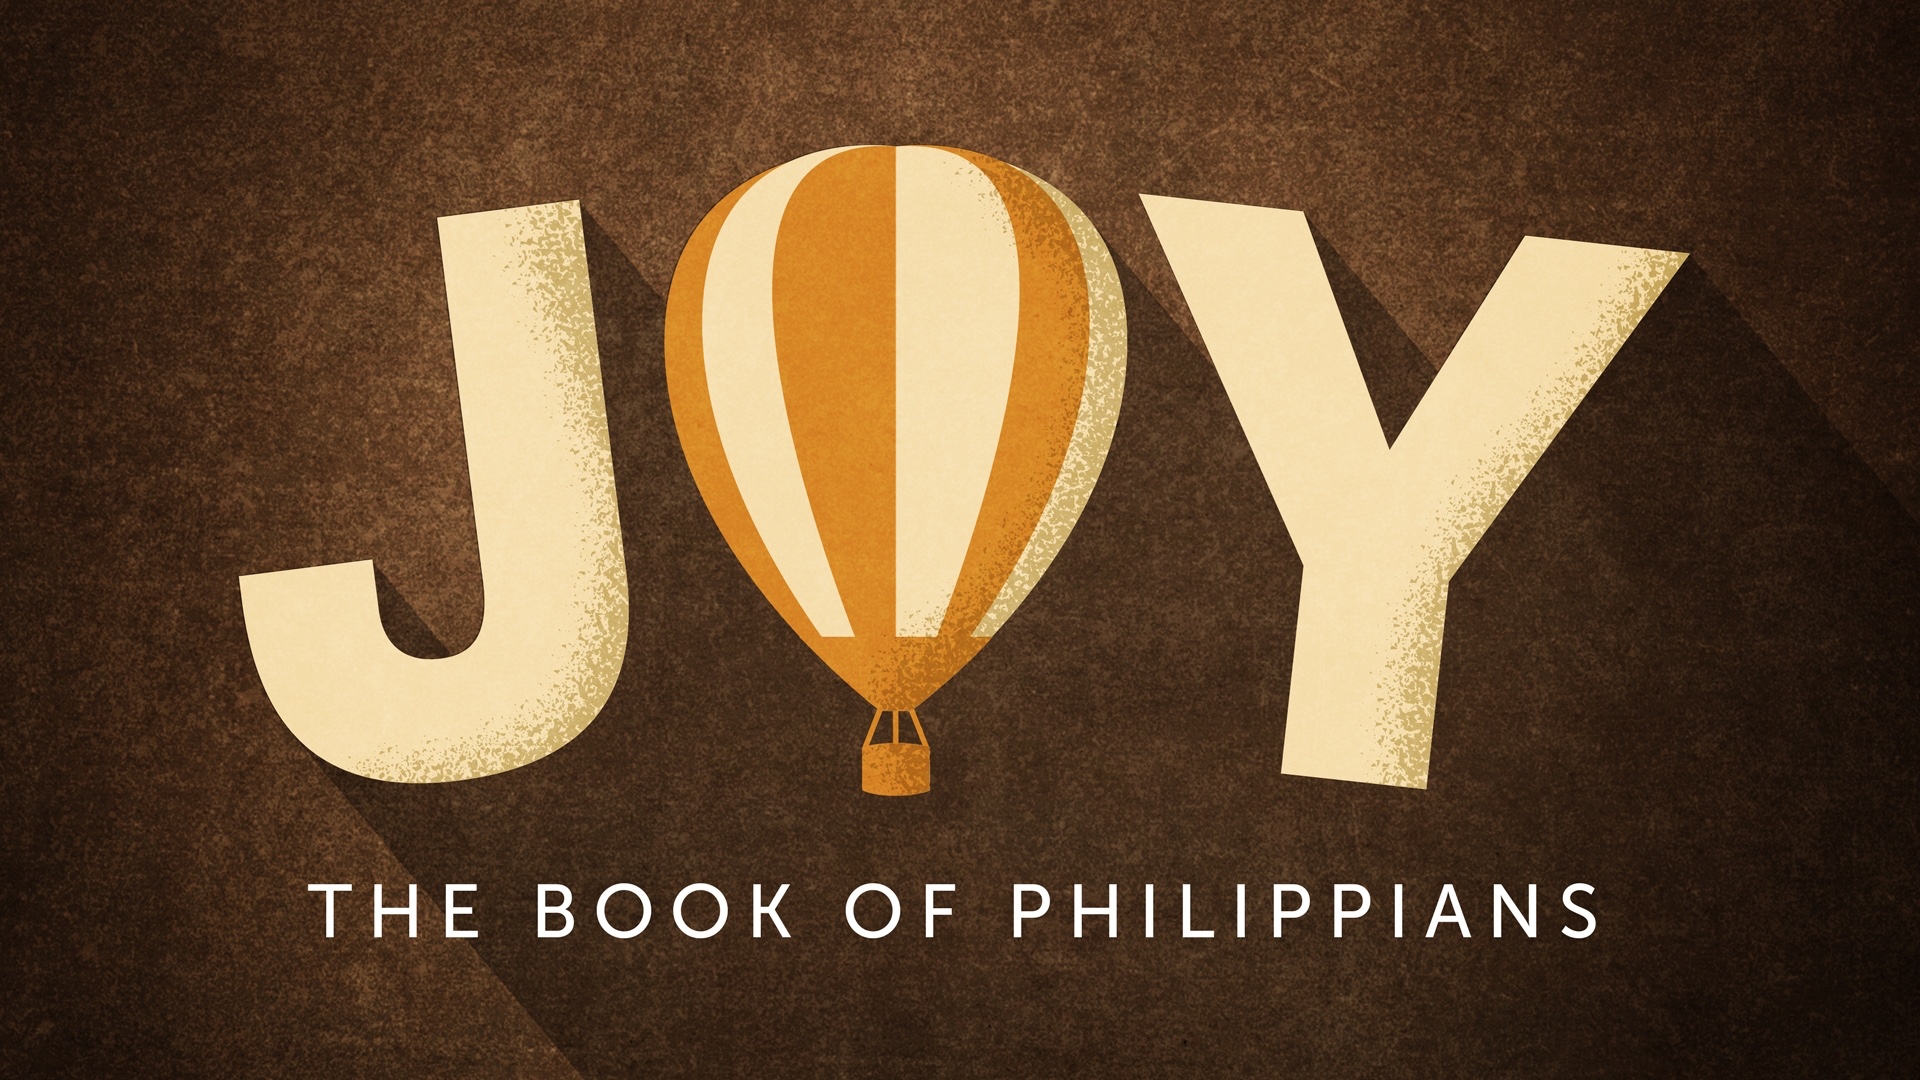 Joy: The Book of Philippians - Finding Joy in Obedience